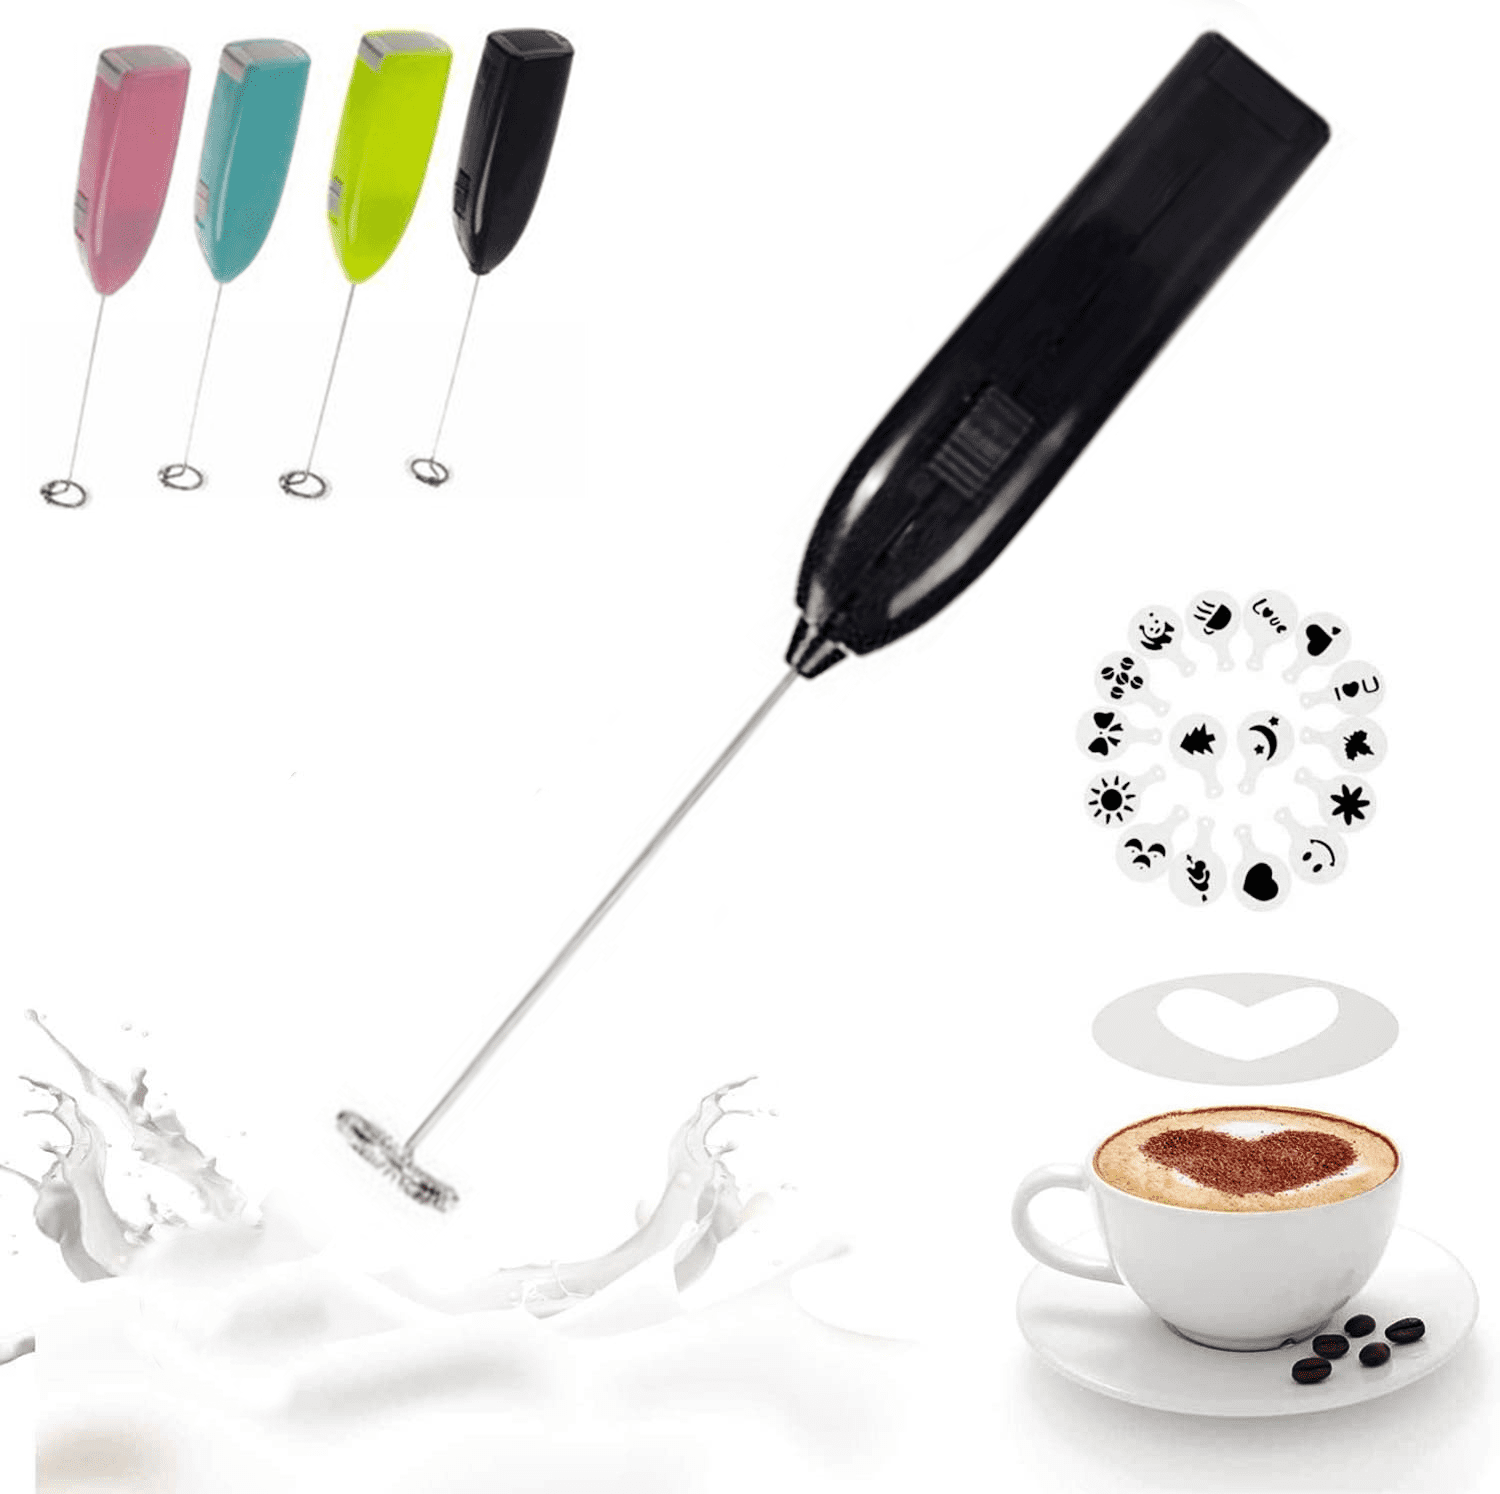 AVEC BLACK 25W GREEK NESCAFE FRAPPE COFFEE ELECTRIC CABLE POWER MIXER FROTHER 